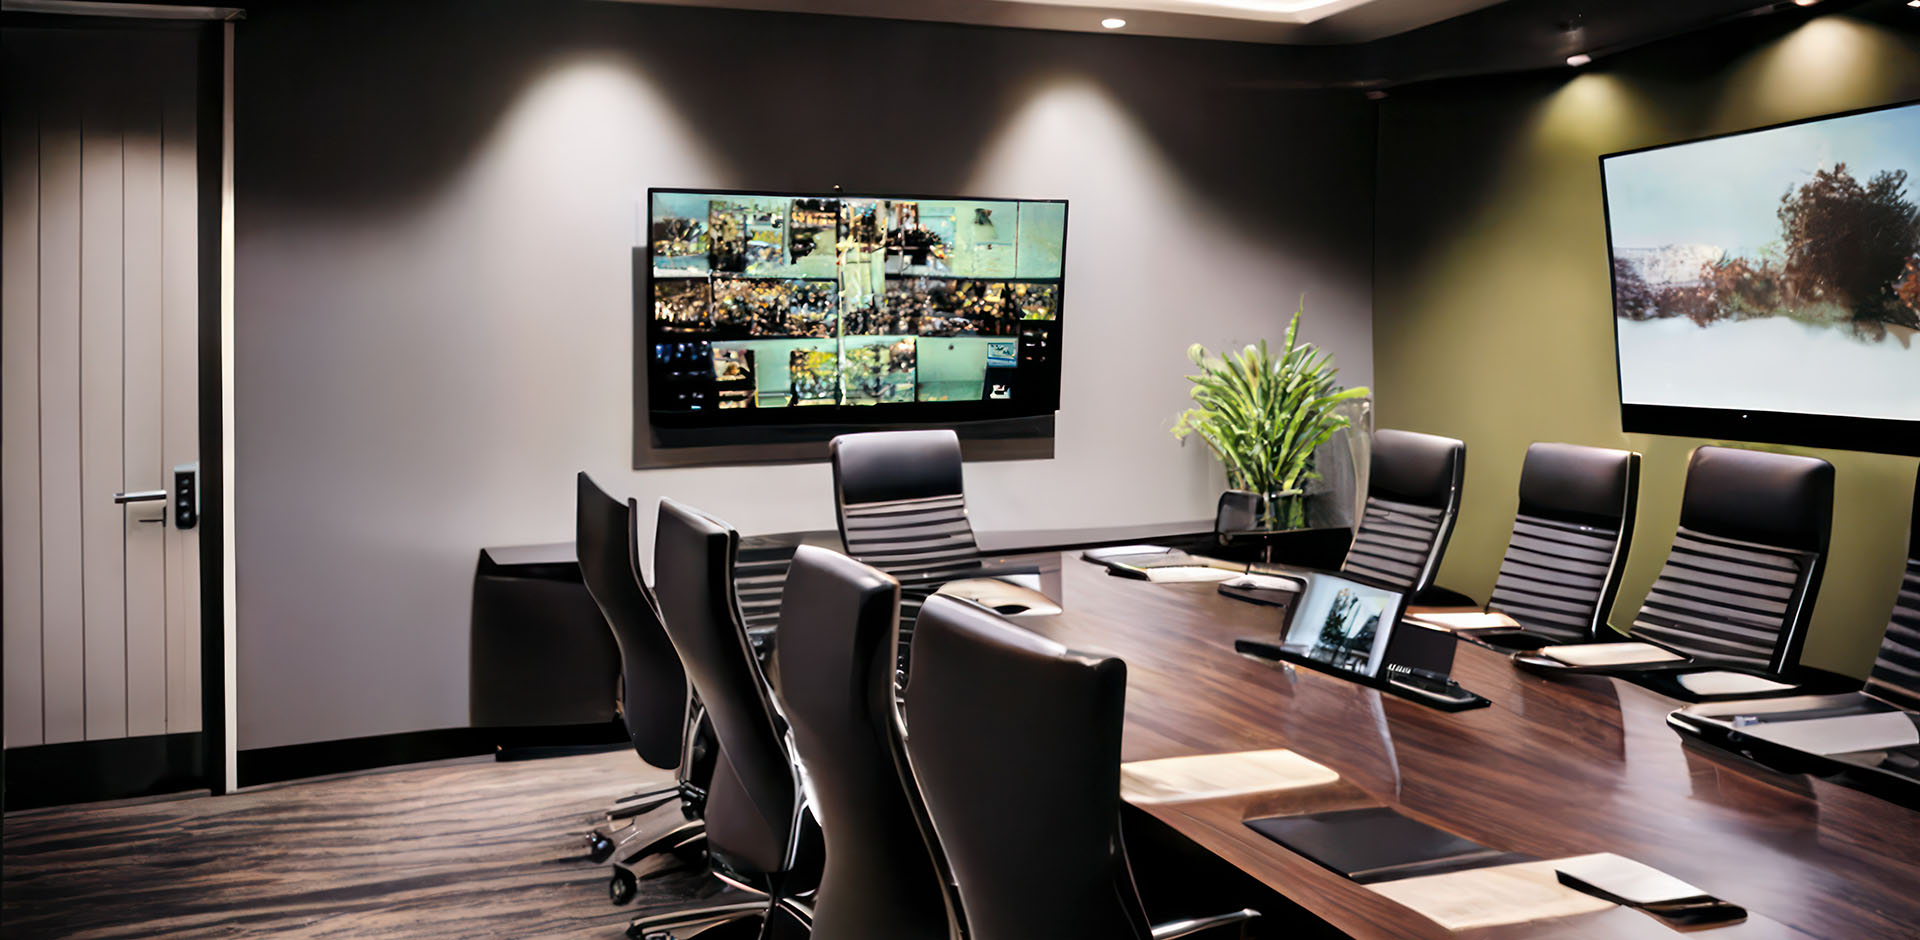 A modern AV-equipped meeting room with several screens and a large meeting table.